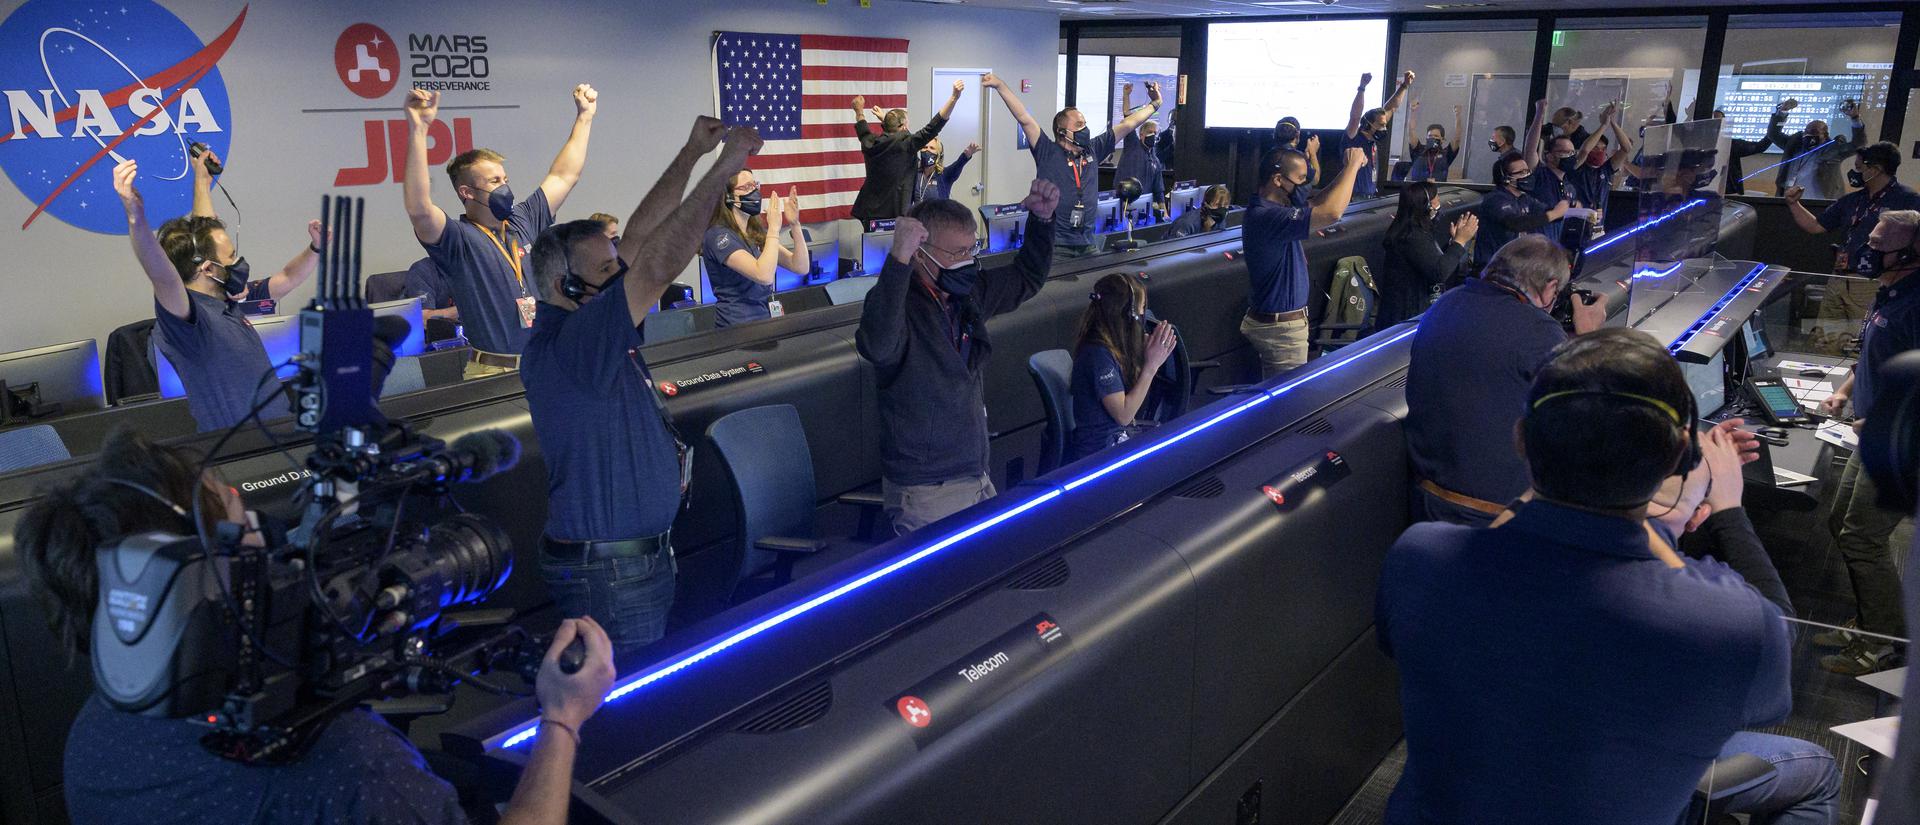 NASA photo of Mars 2020 Perseverance Rover team in Mission Control, cheering when they heard the news that Perseverance had landed safely on Mars.